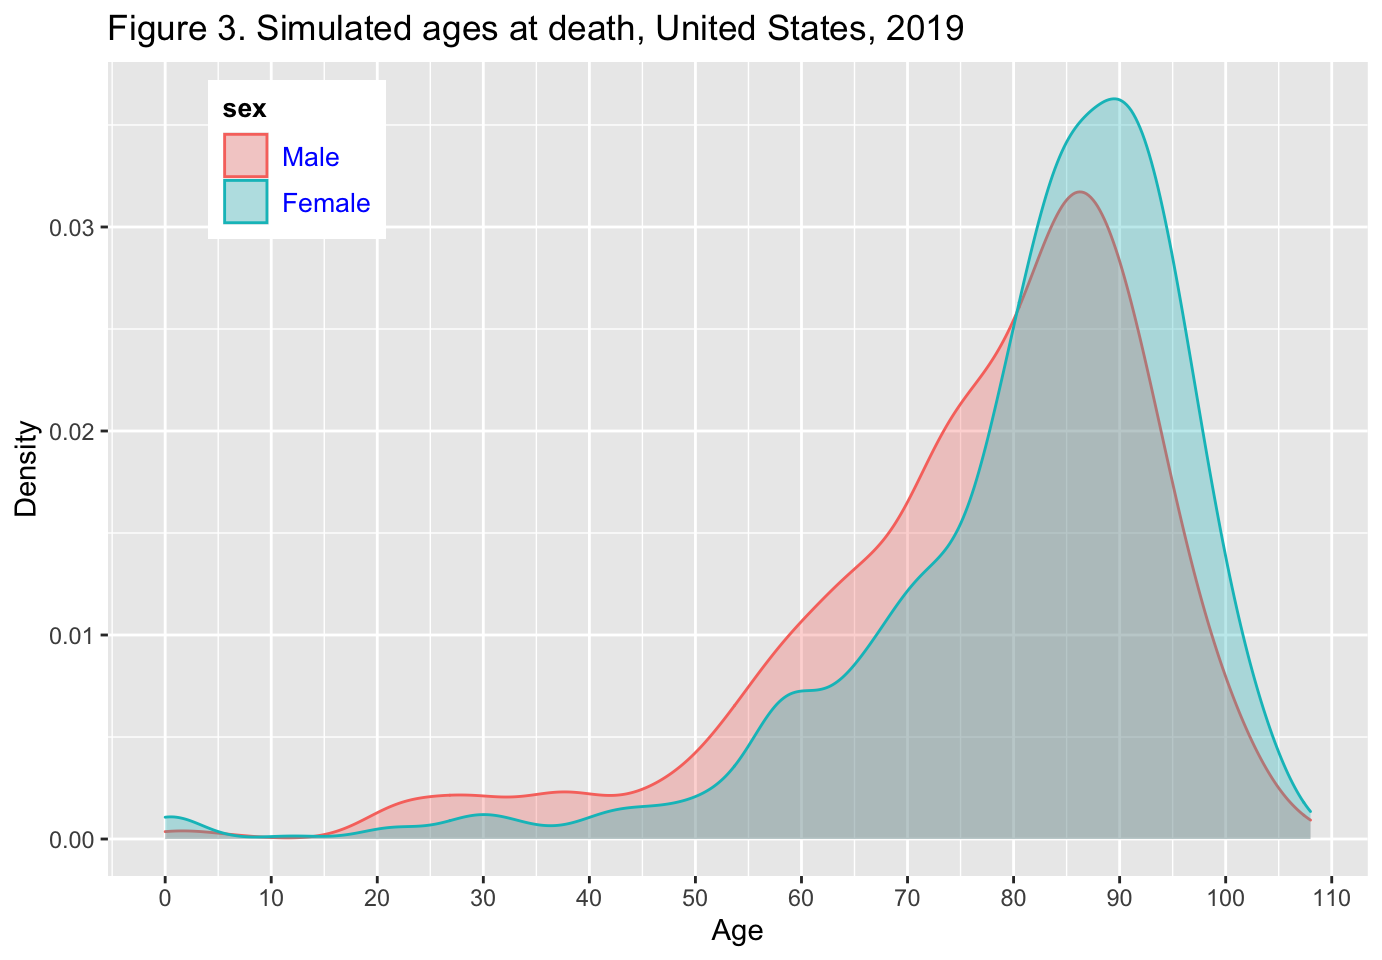 Plot of  simulated ages at death, US 2019